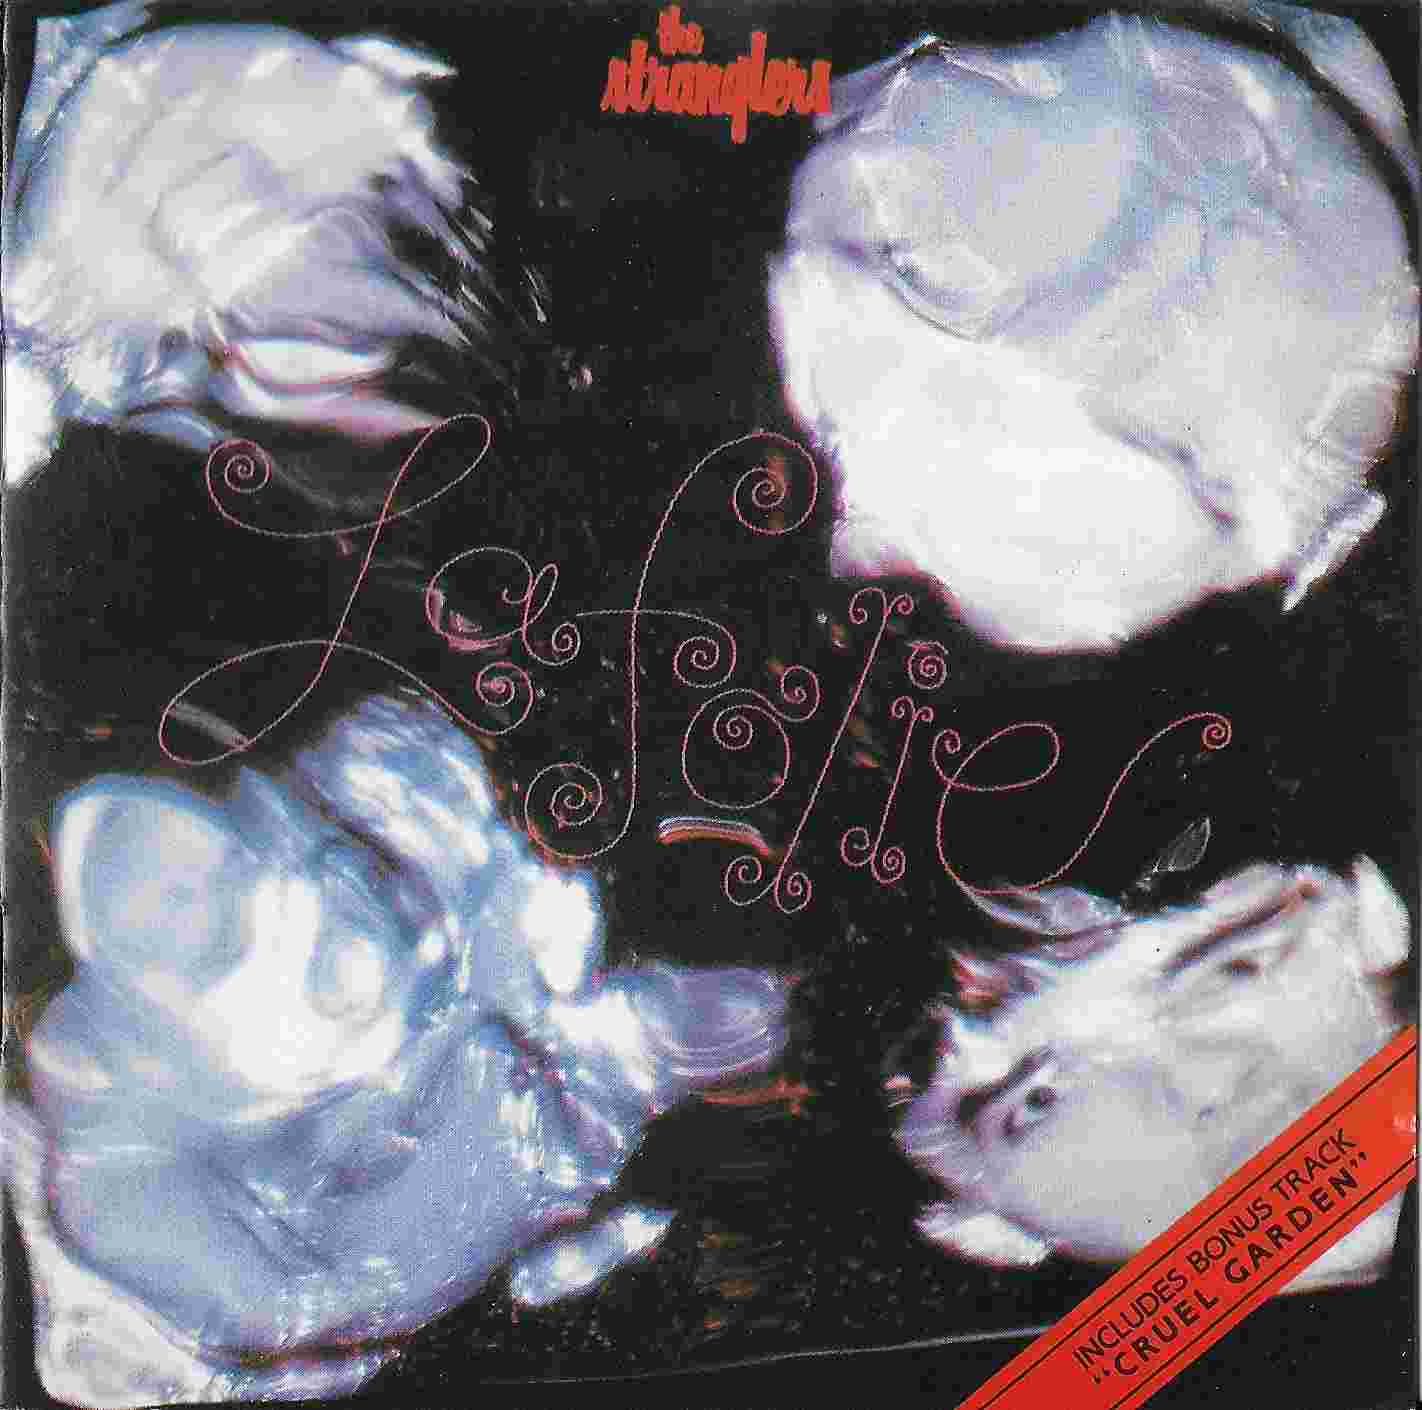 Picture of CDP 746614-2 La folie by artist The Stranglers from The Stranglers cds